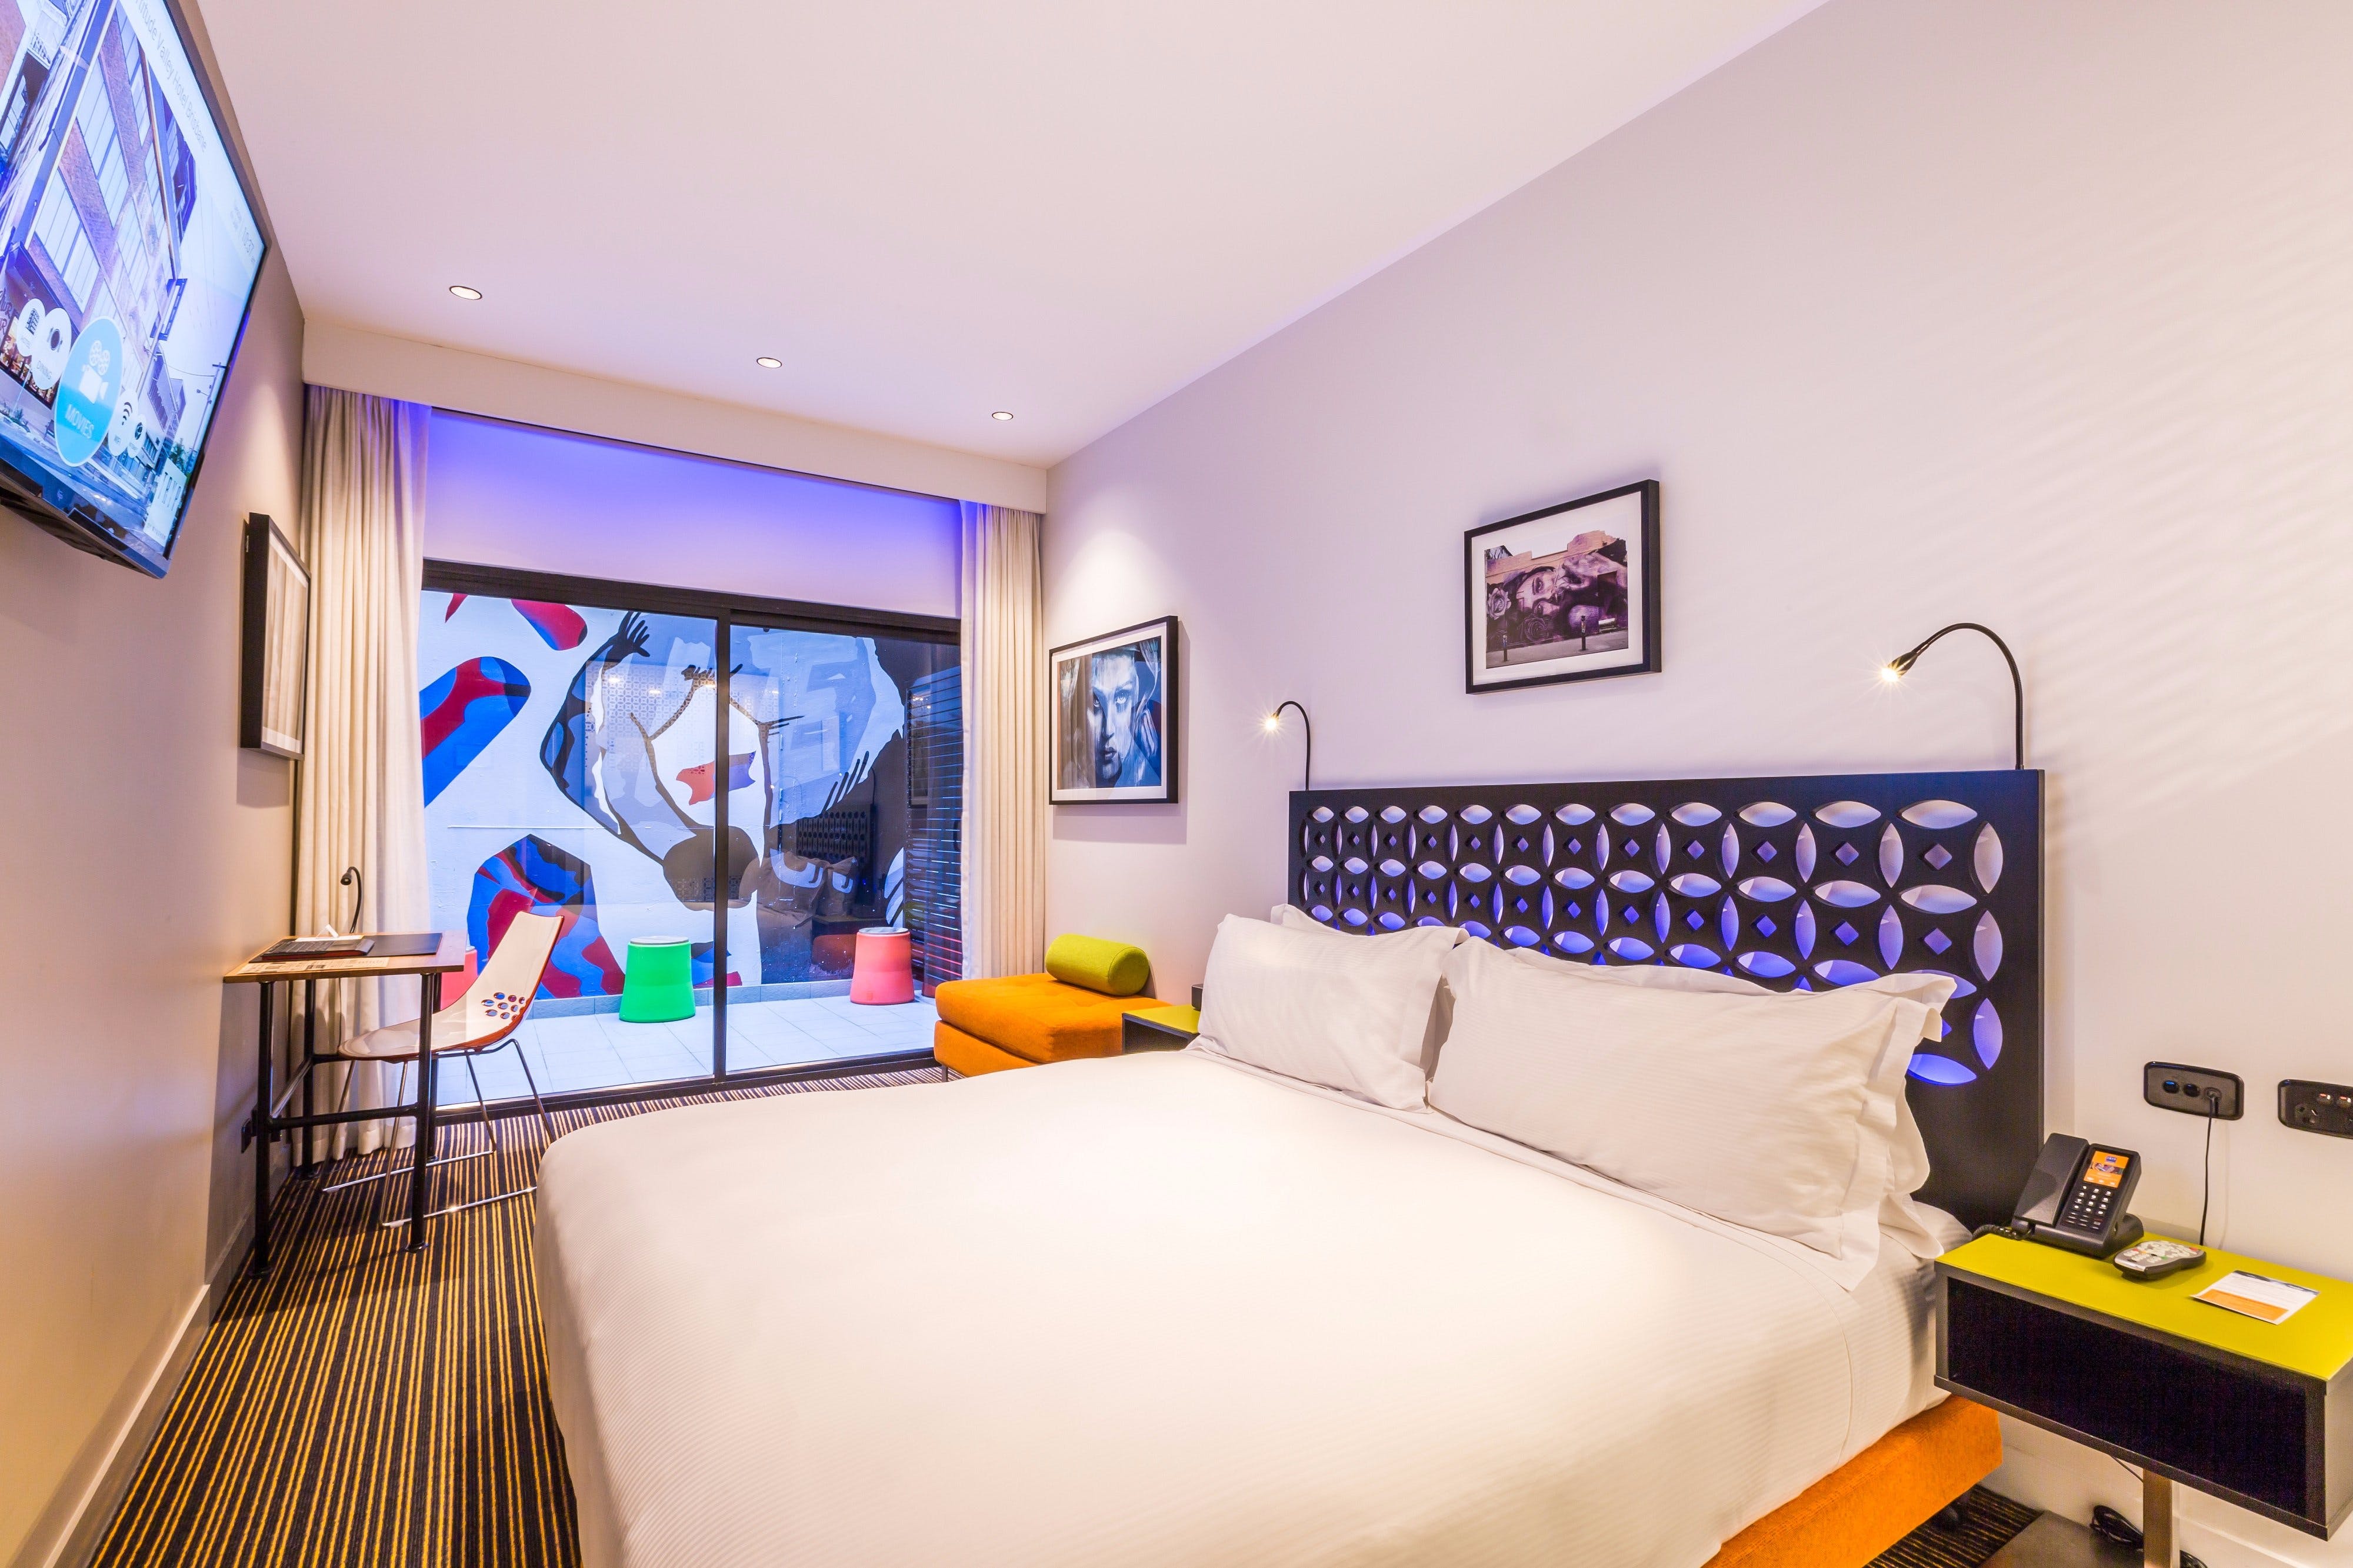 Tryp Fortitude Valley Hotel Brisbane - Accommodation Bookings 1